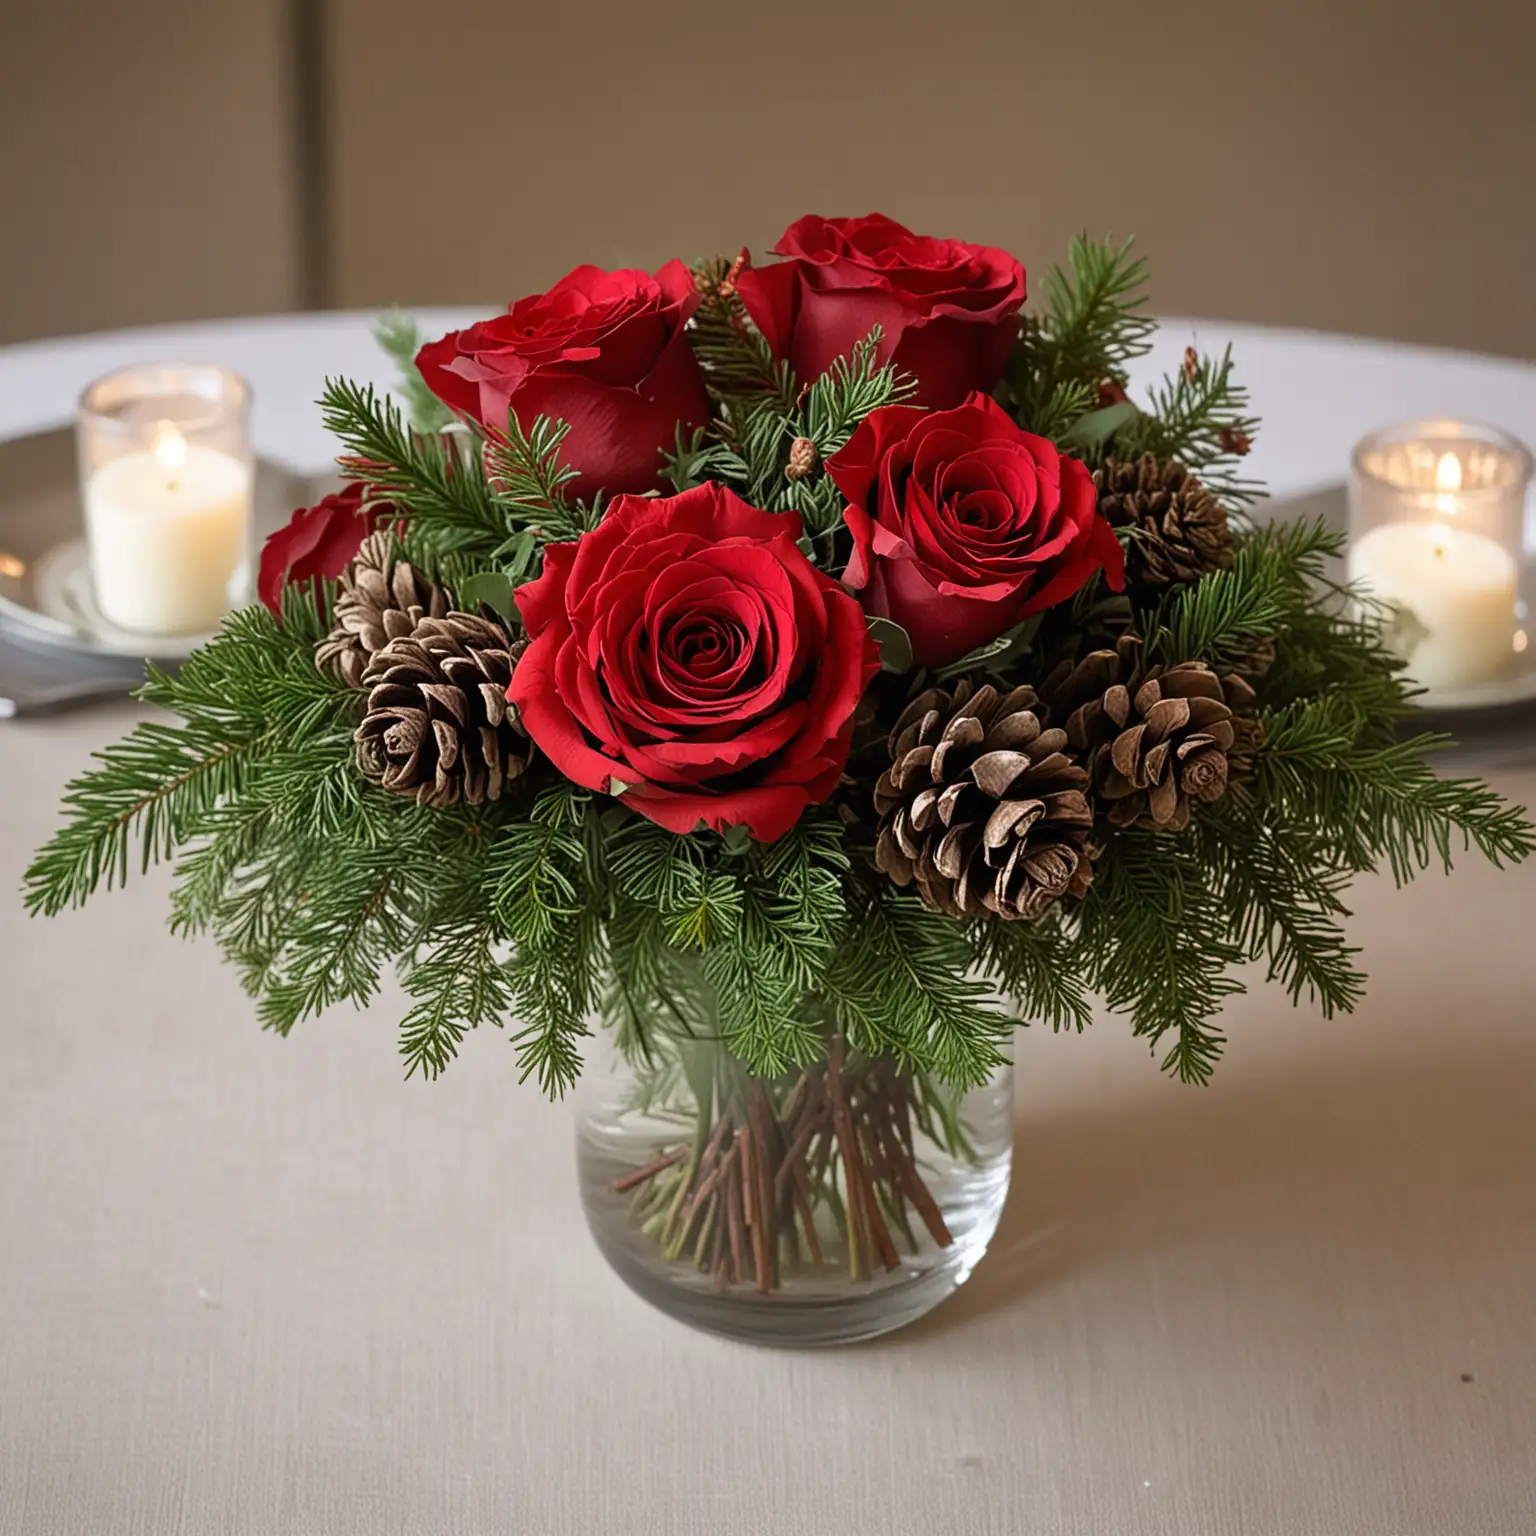 Winter-Wedding-Centerpiece-Simple-Elegance-with-Red-Roses-Evergreen-and-Pinecones